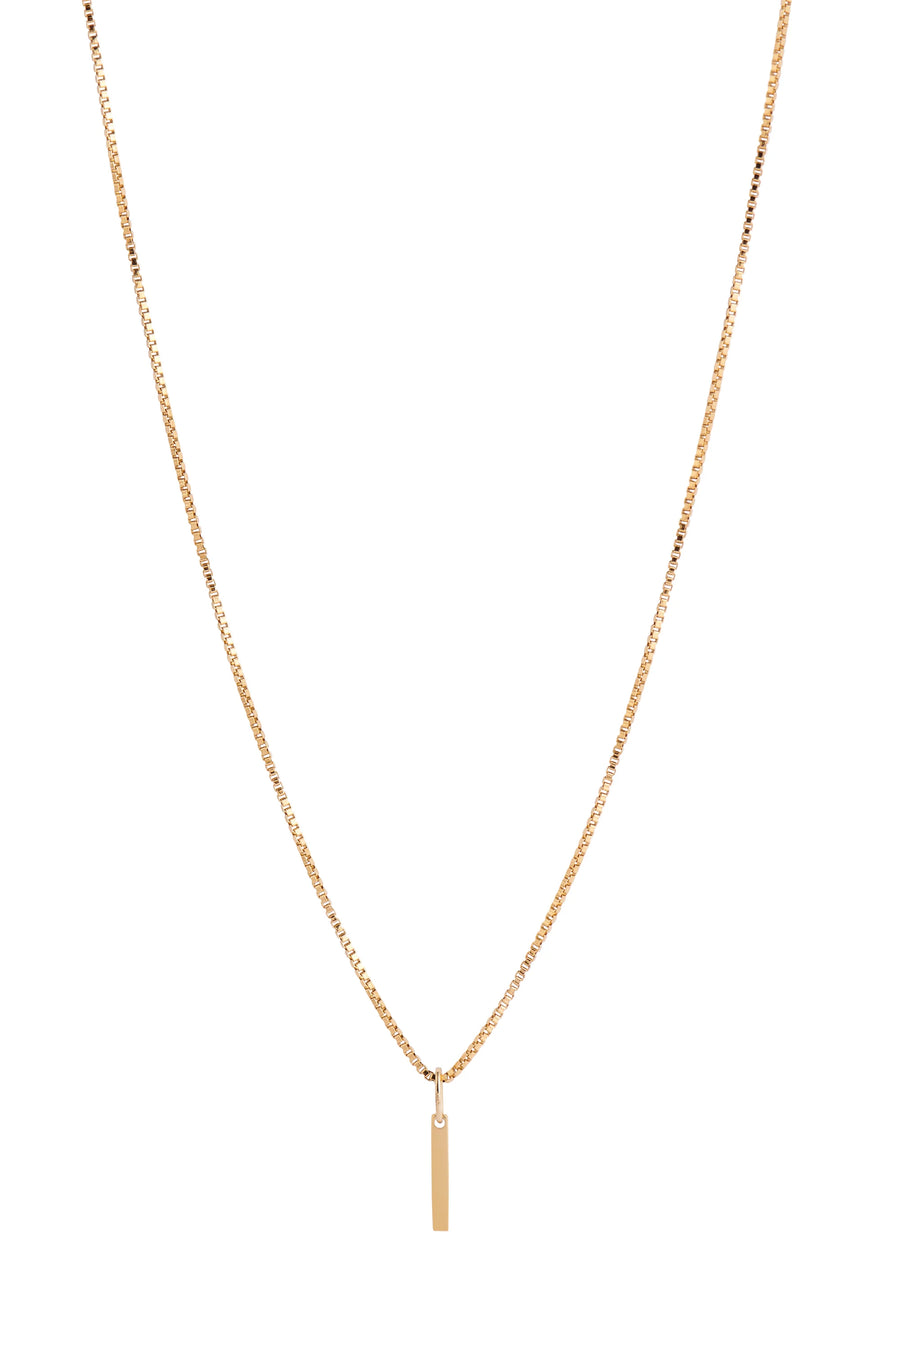 LISBETH JEWELRY - ATTICUS NECKLACE - FILLED GOLD